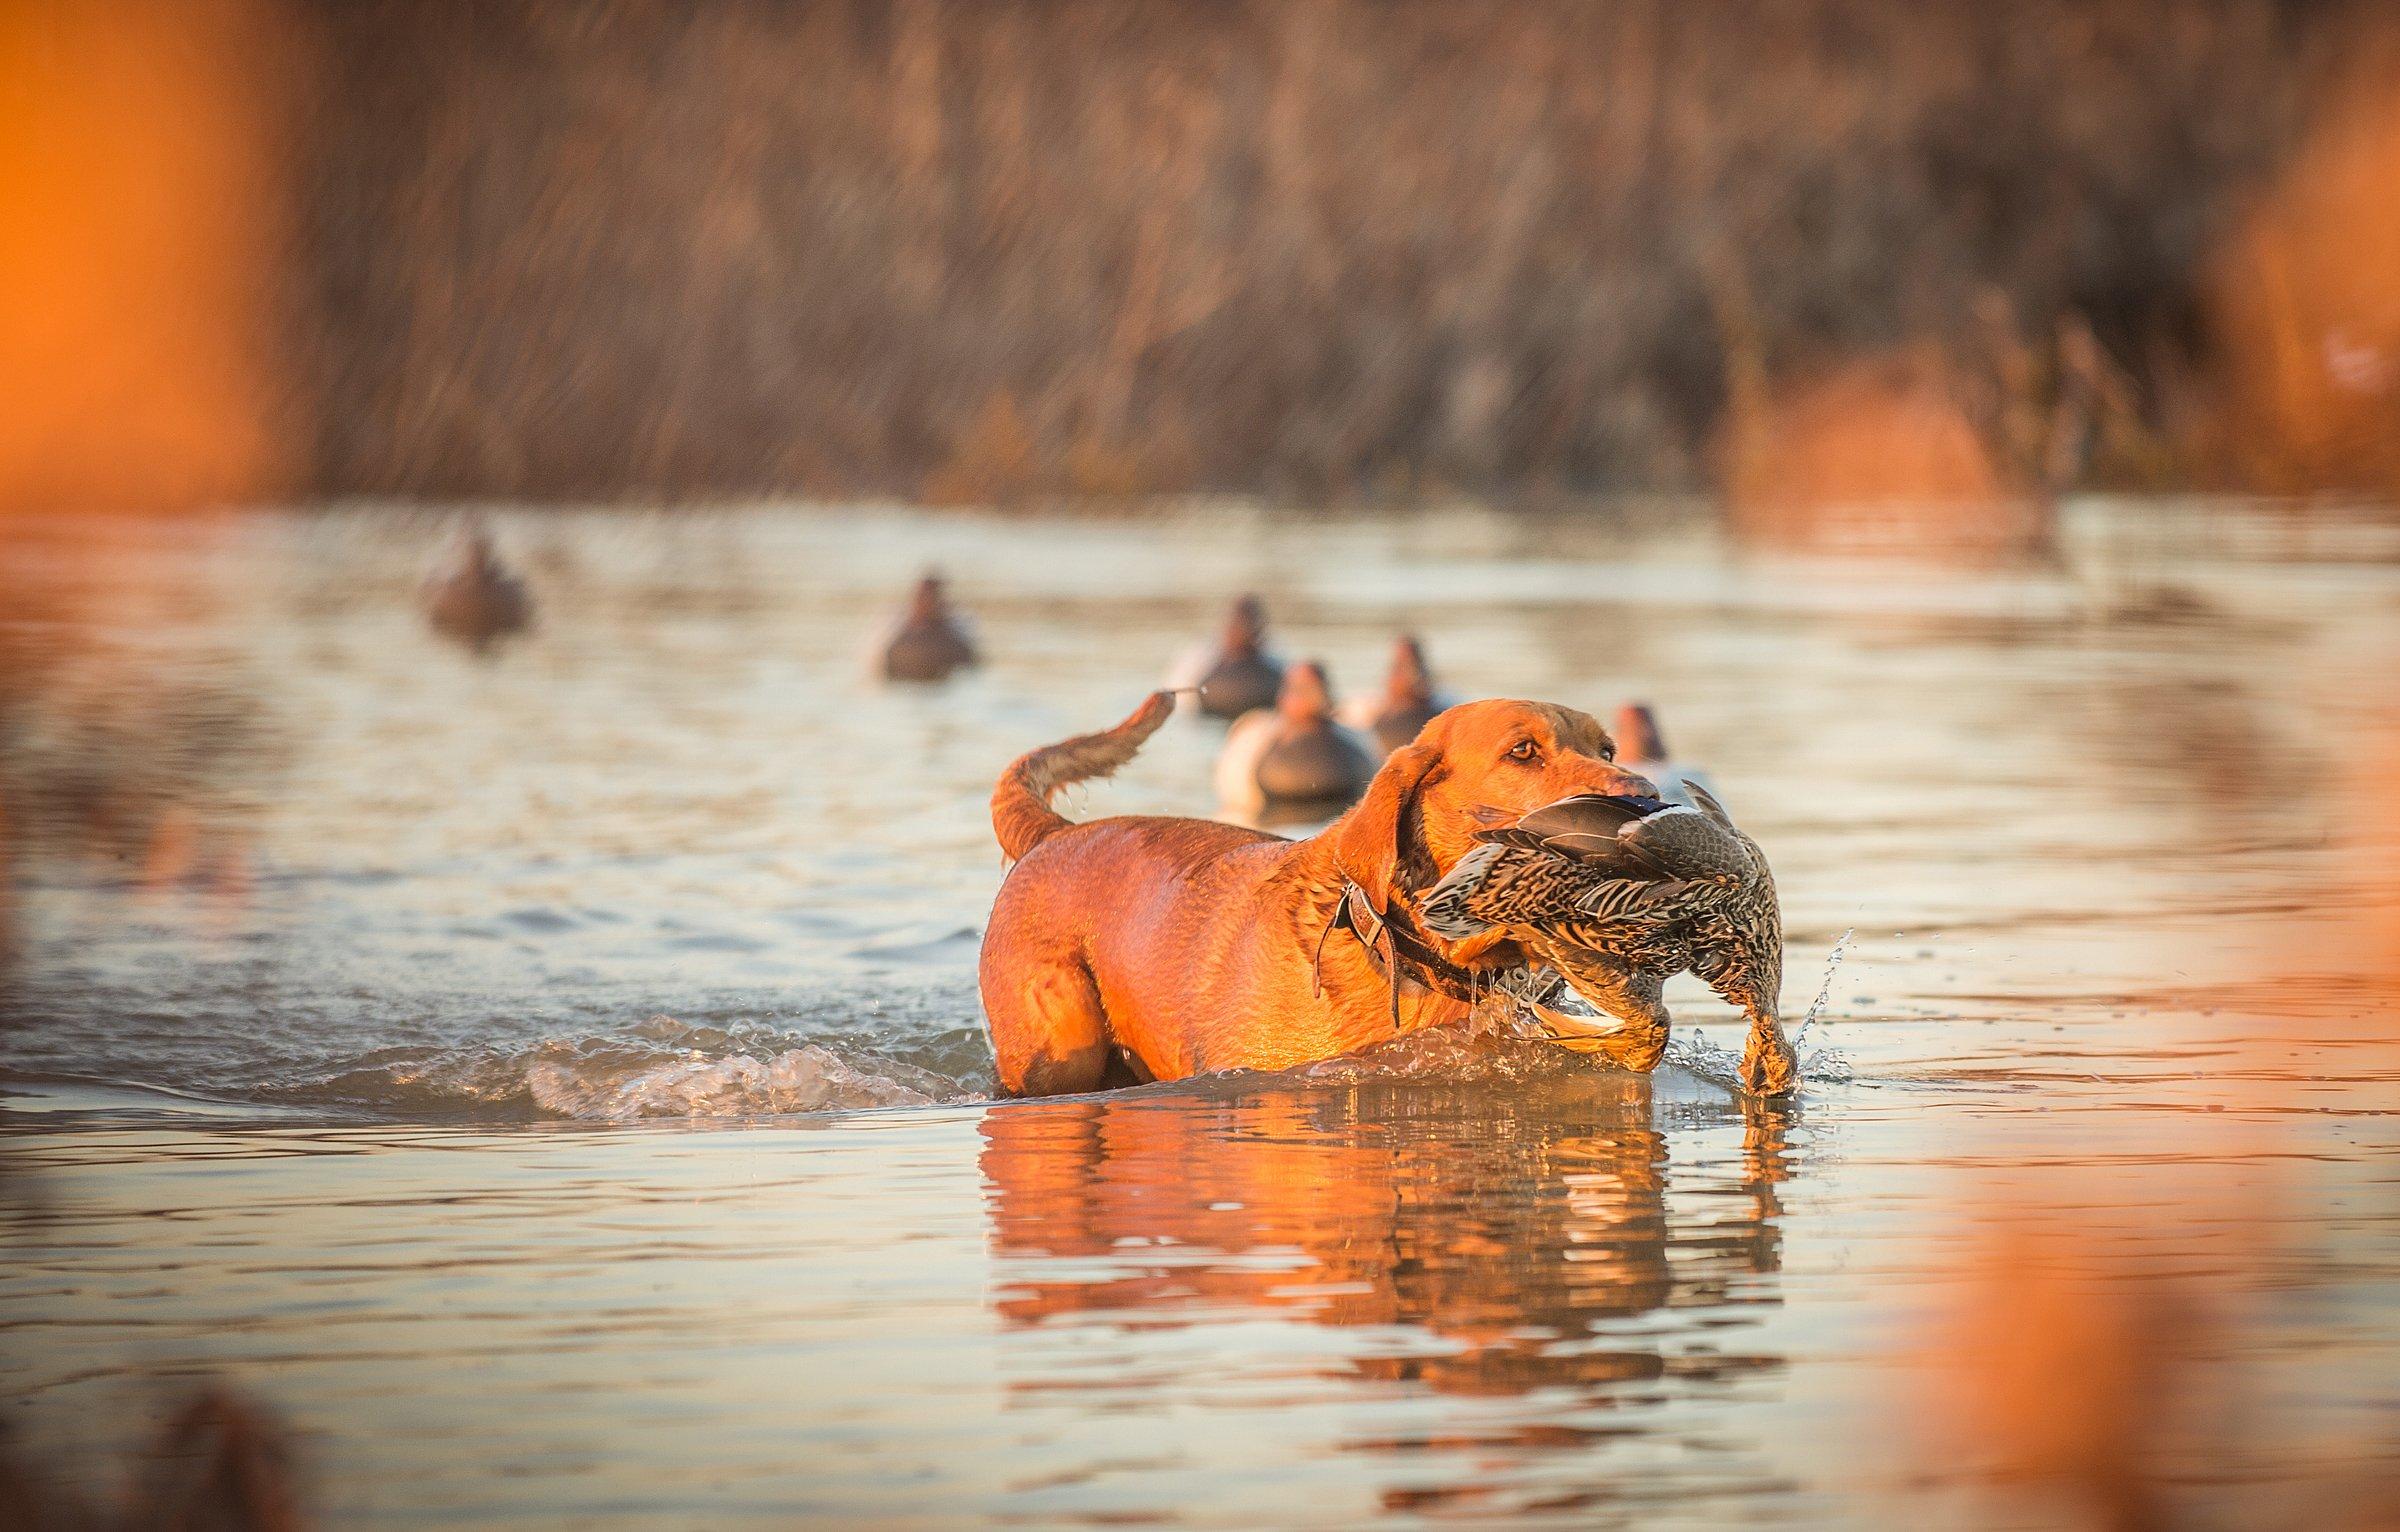 Hunting dogs face many potential dangers afield. Learn how to keep your best buddy healthy and happy. Photo © Bill Konway